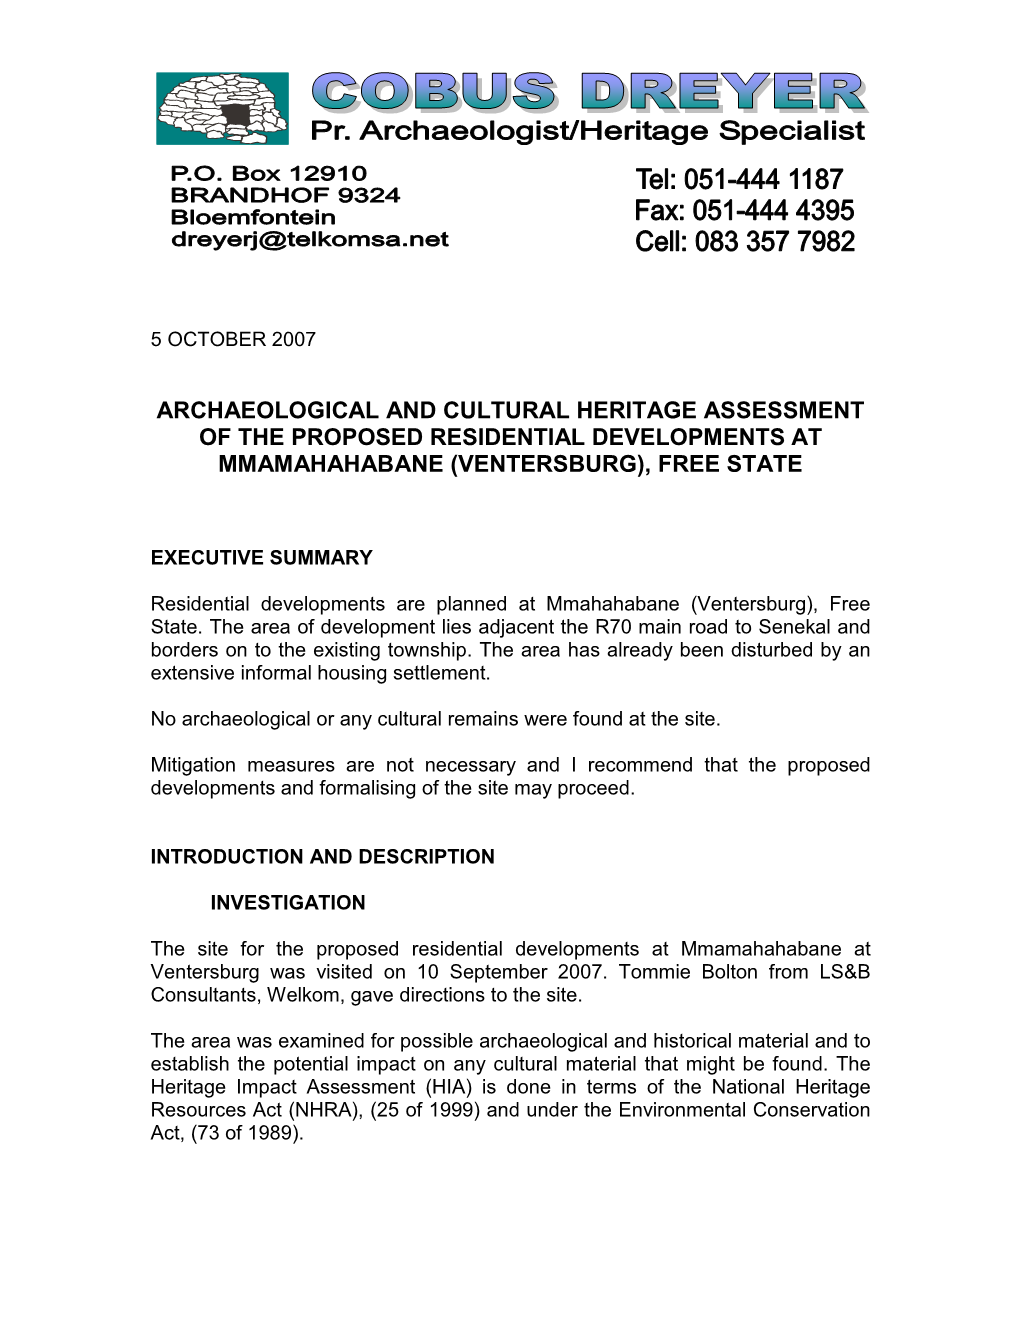 Archaeological and Cultural Heritage Assessment of the Proposed Residential Developments at Mmamahahabane (Ventersburg), Free State